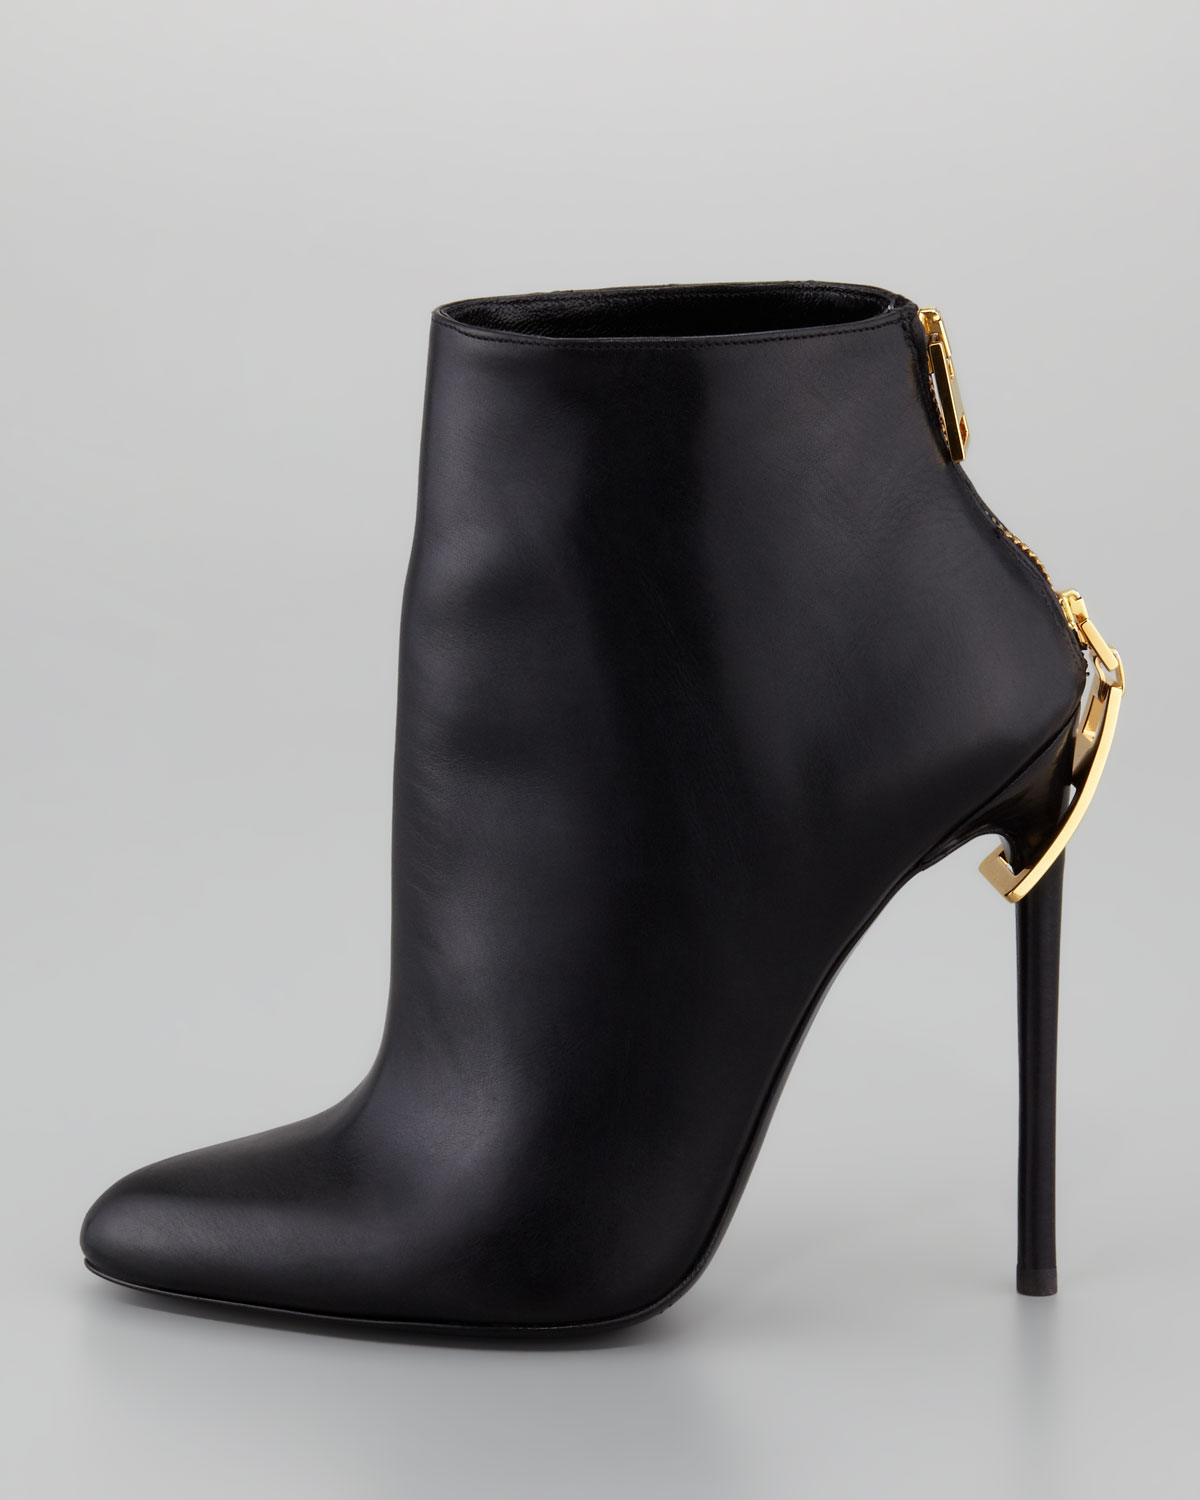 Tom Ford 2013 Fall Footwear Collection - Glowlicious.Me 